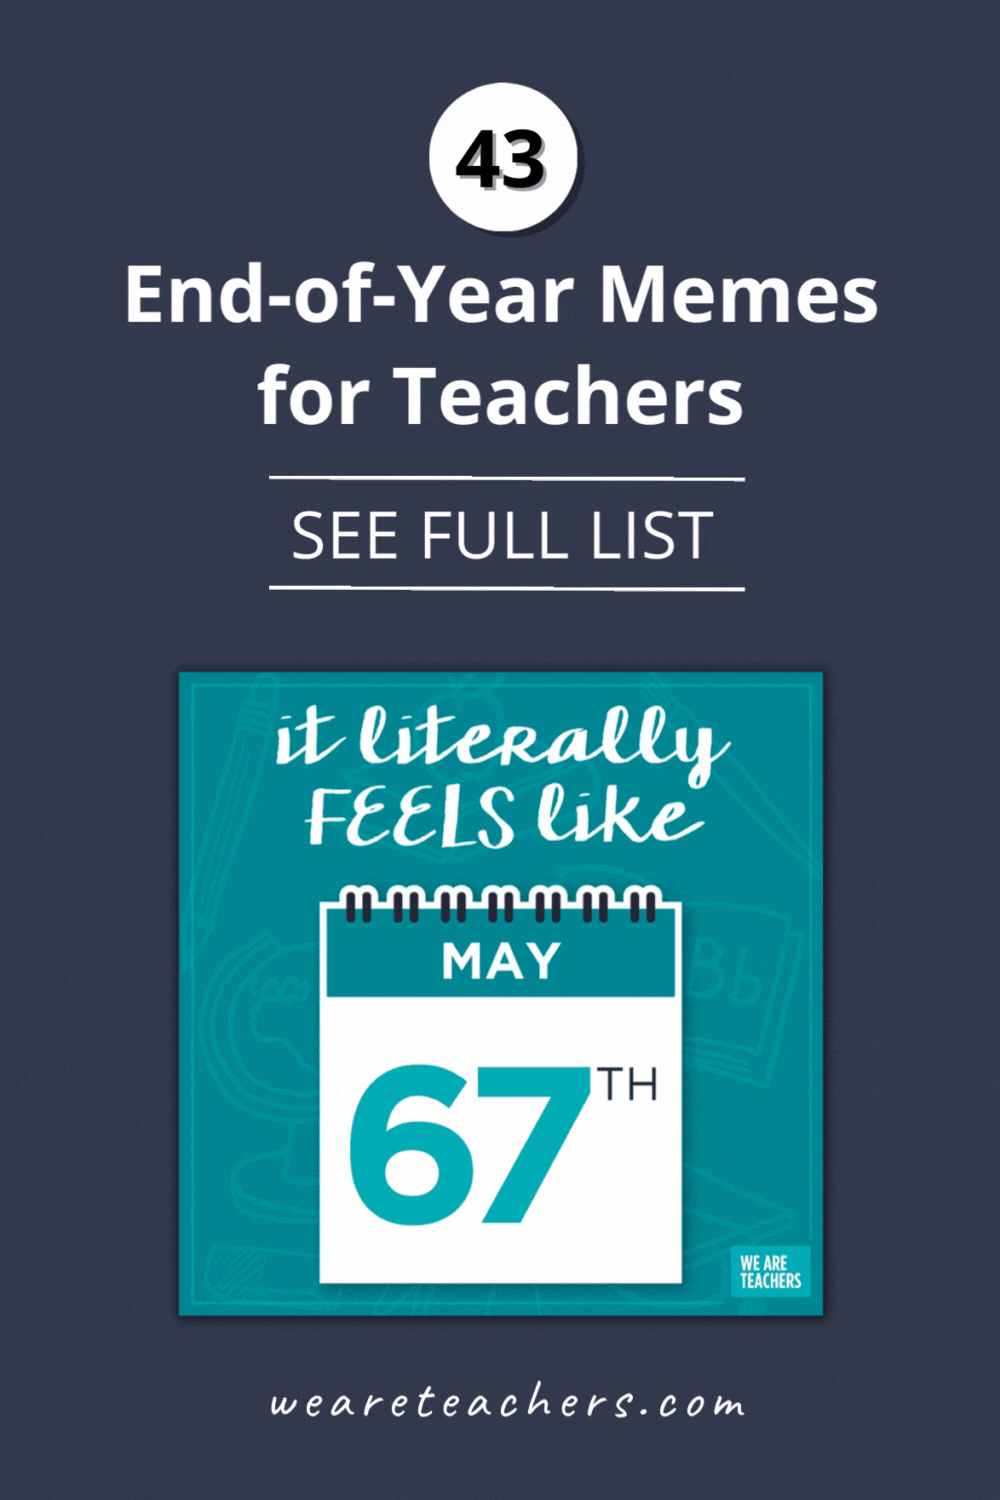 You're in the homestretch! These end-of-the-school-year memes for teachers will make you laugh and help ease you into summer!